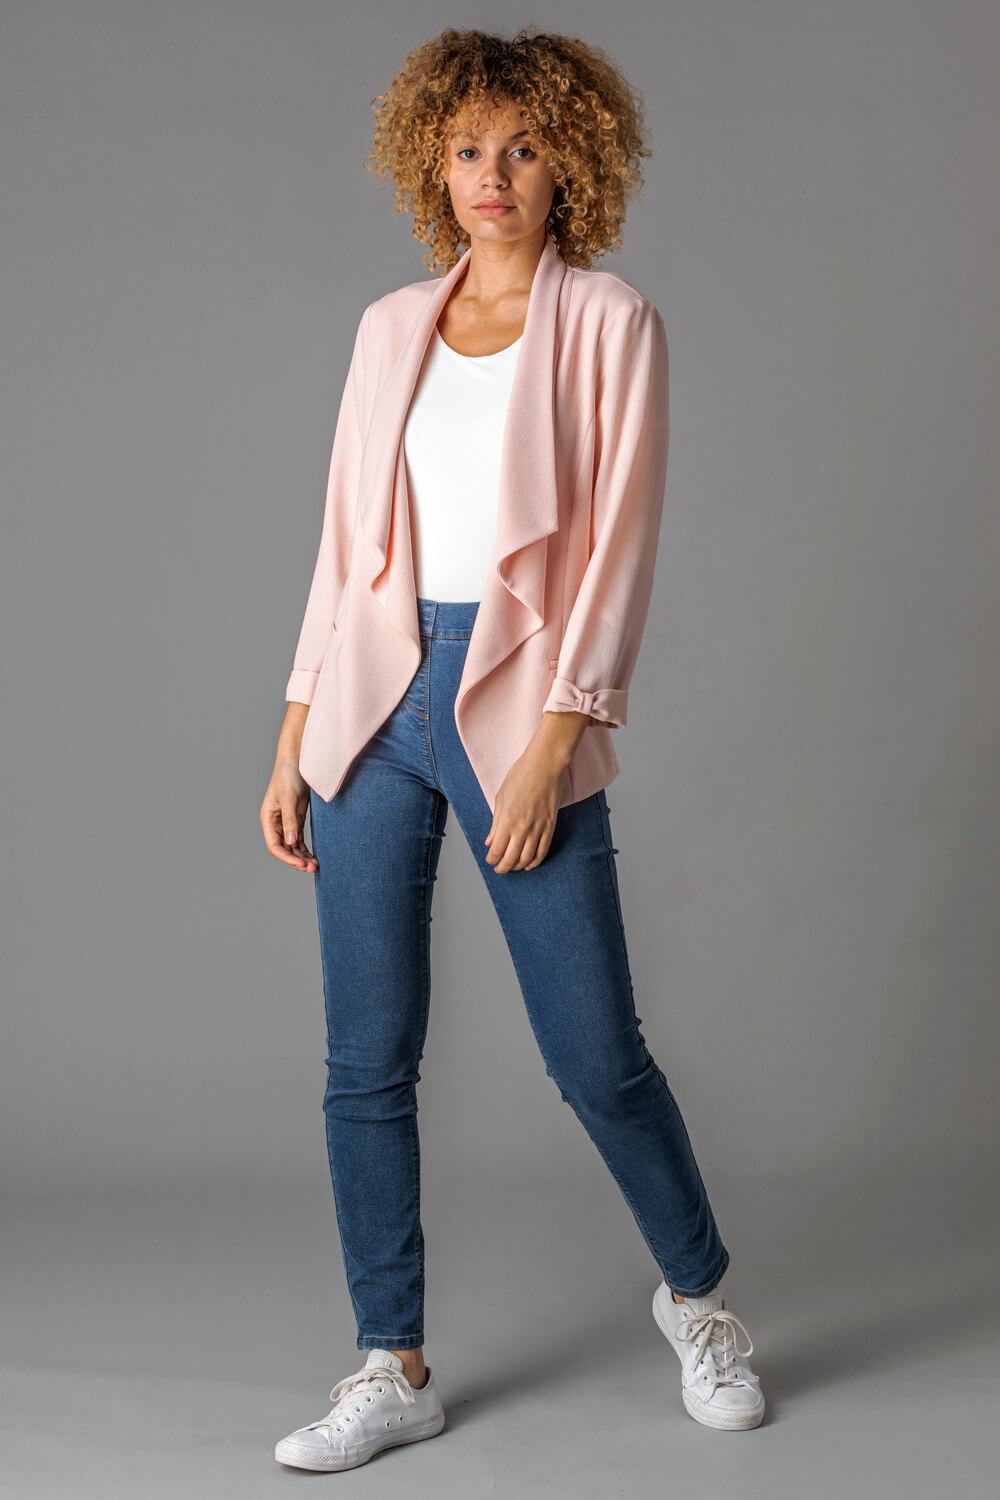 PINK Waterfall Front Bow Sleeve Jacket, Image 2 of 4